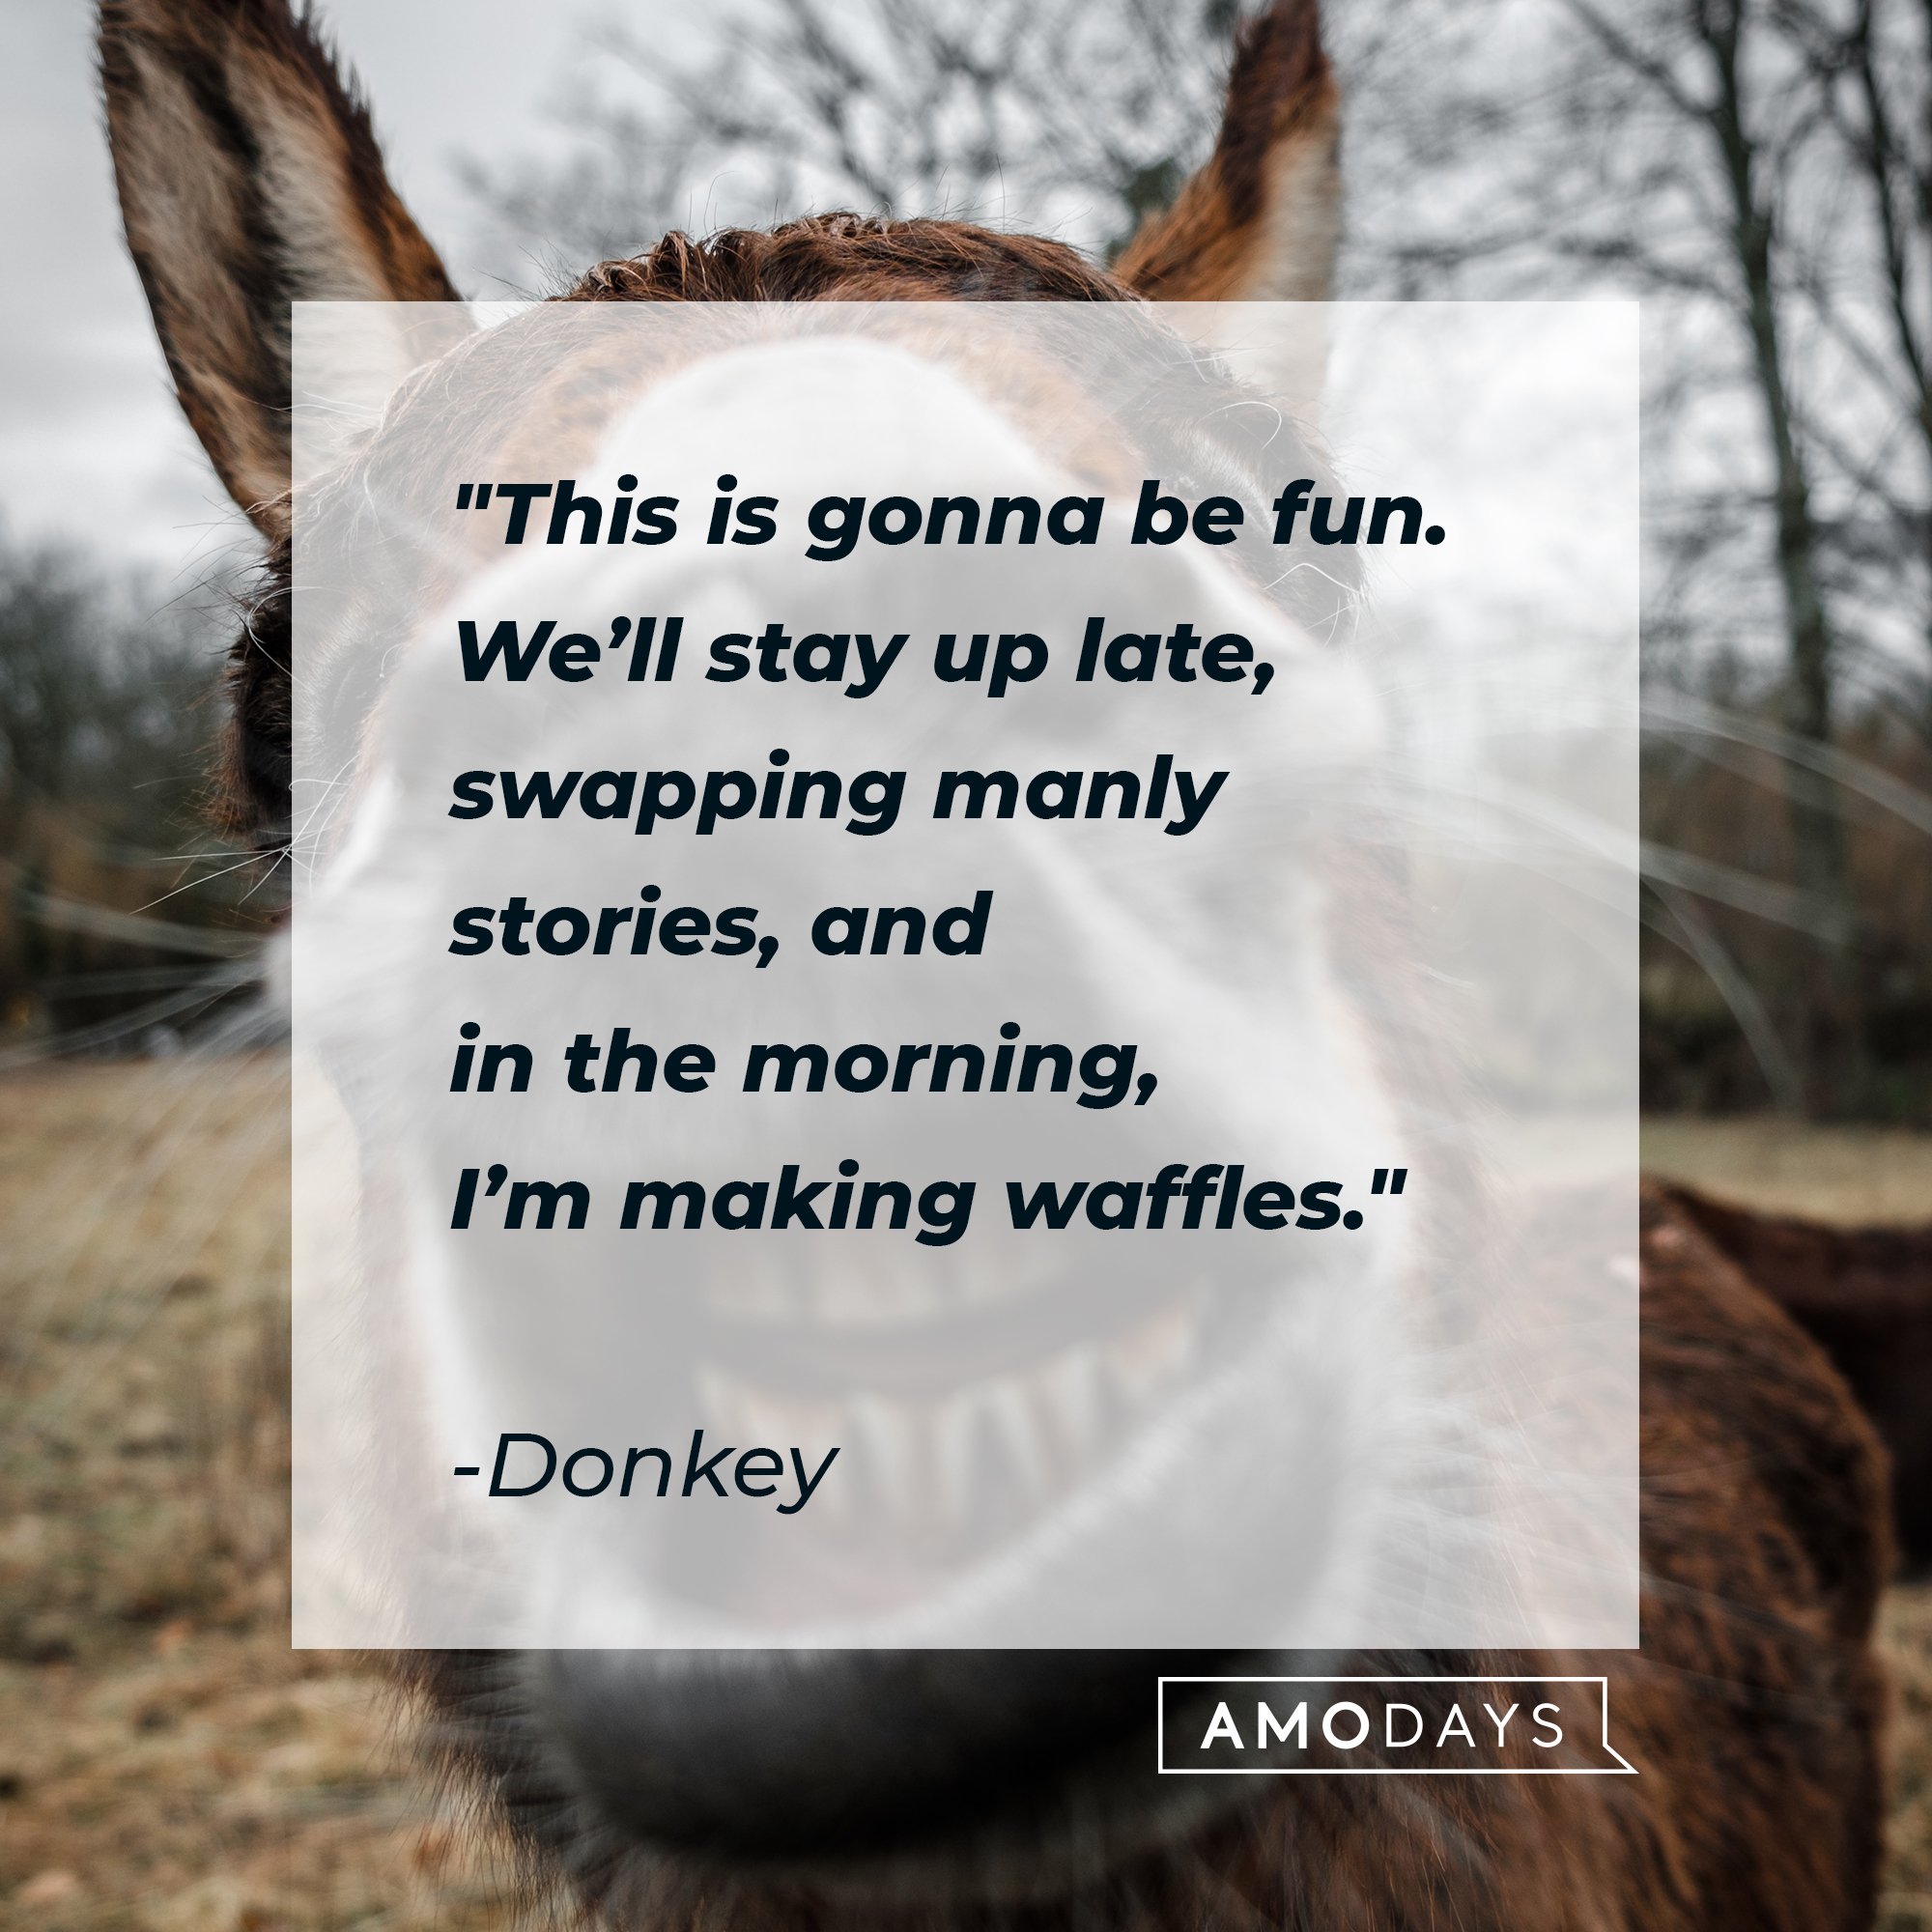  Donkey's quote: "This is gonna be fun. We’ll stay up late, swapping manly stories, and in the morning, I’m making waffles." | Image: AmoDays